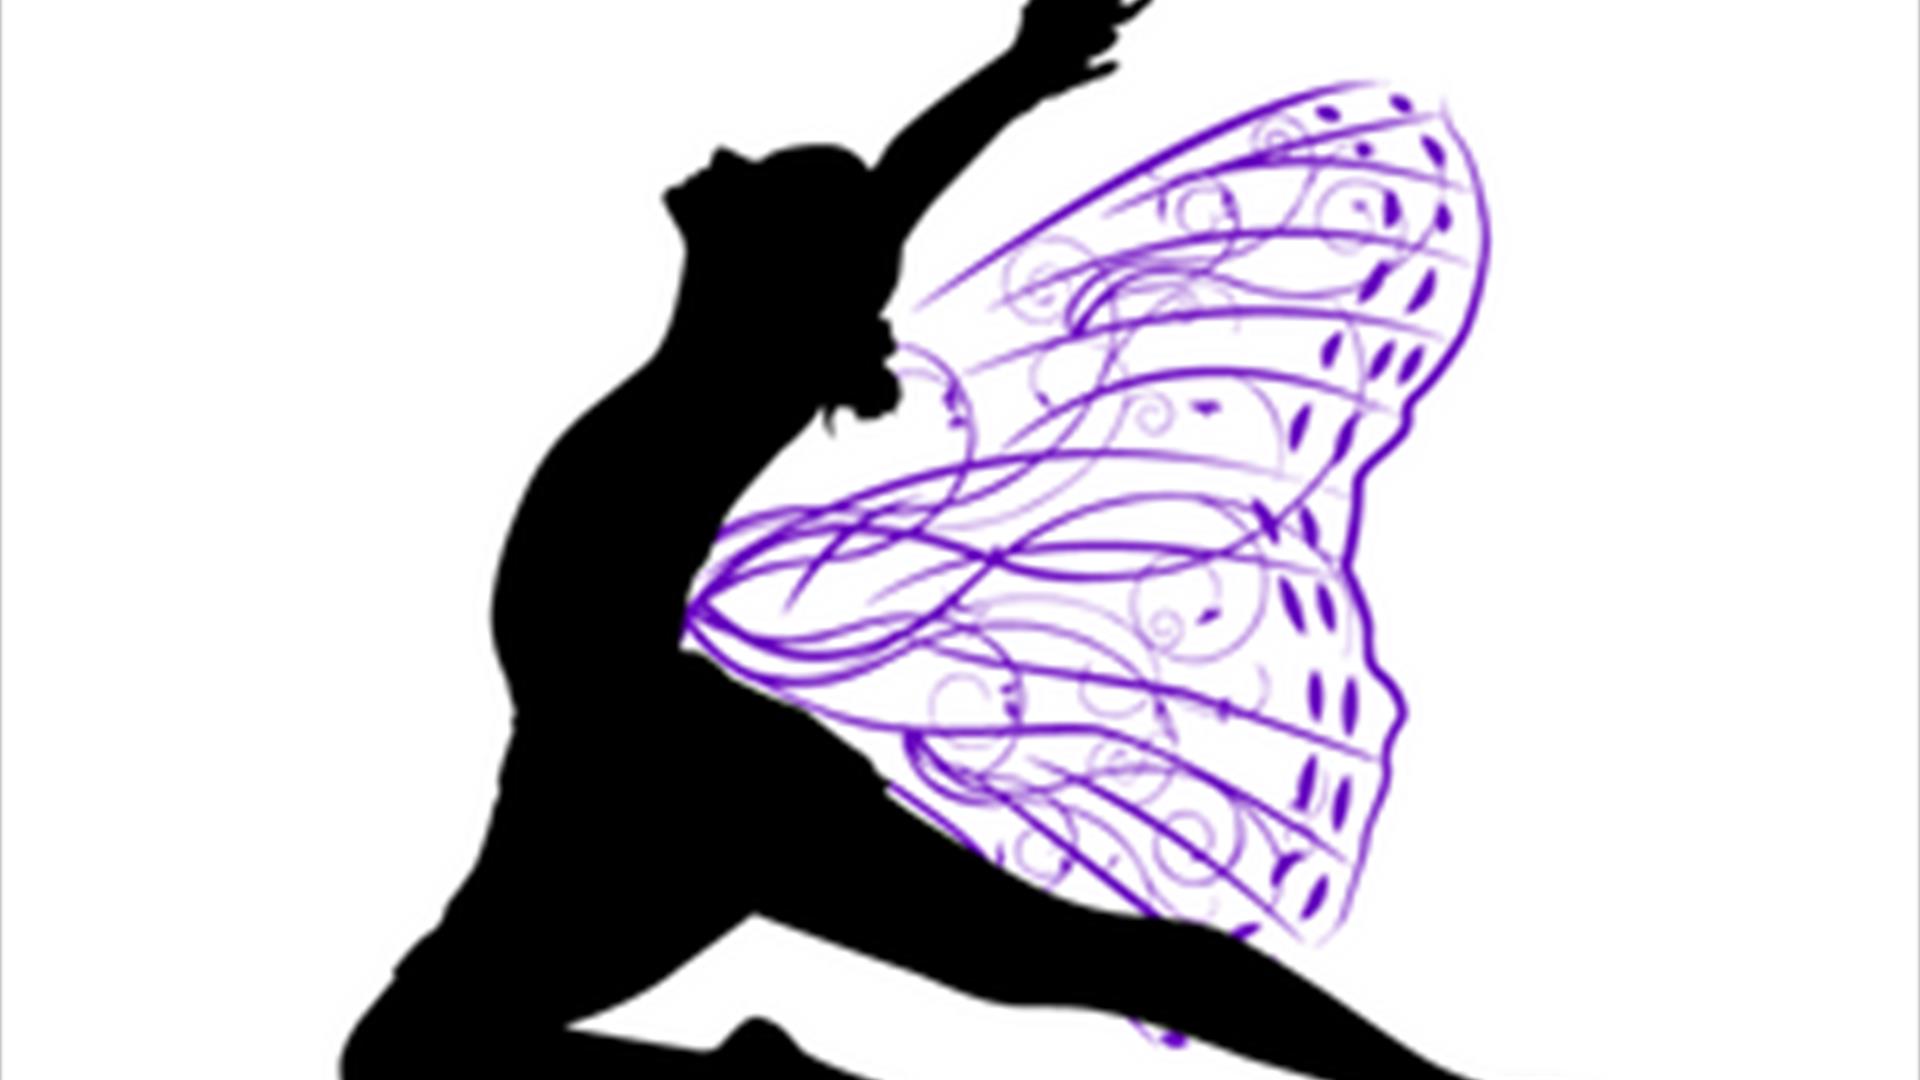 PICTURE OF DANCER WITH ANGEL WINGS